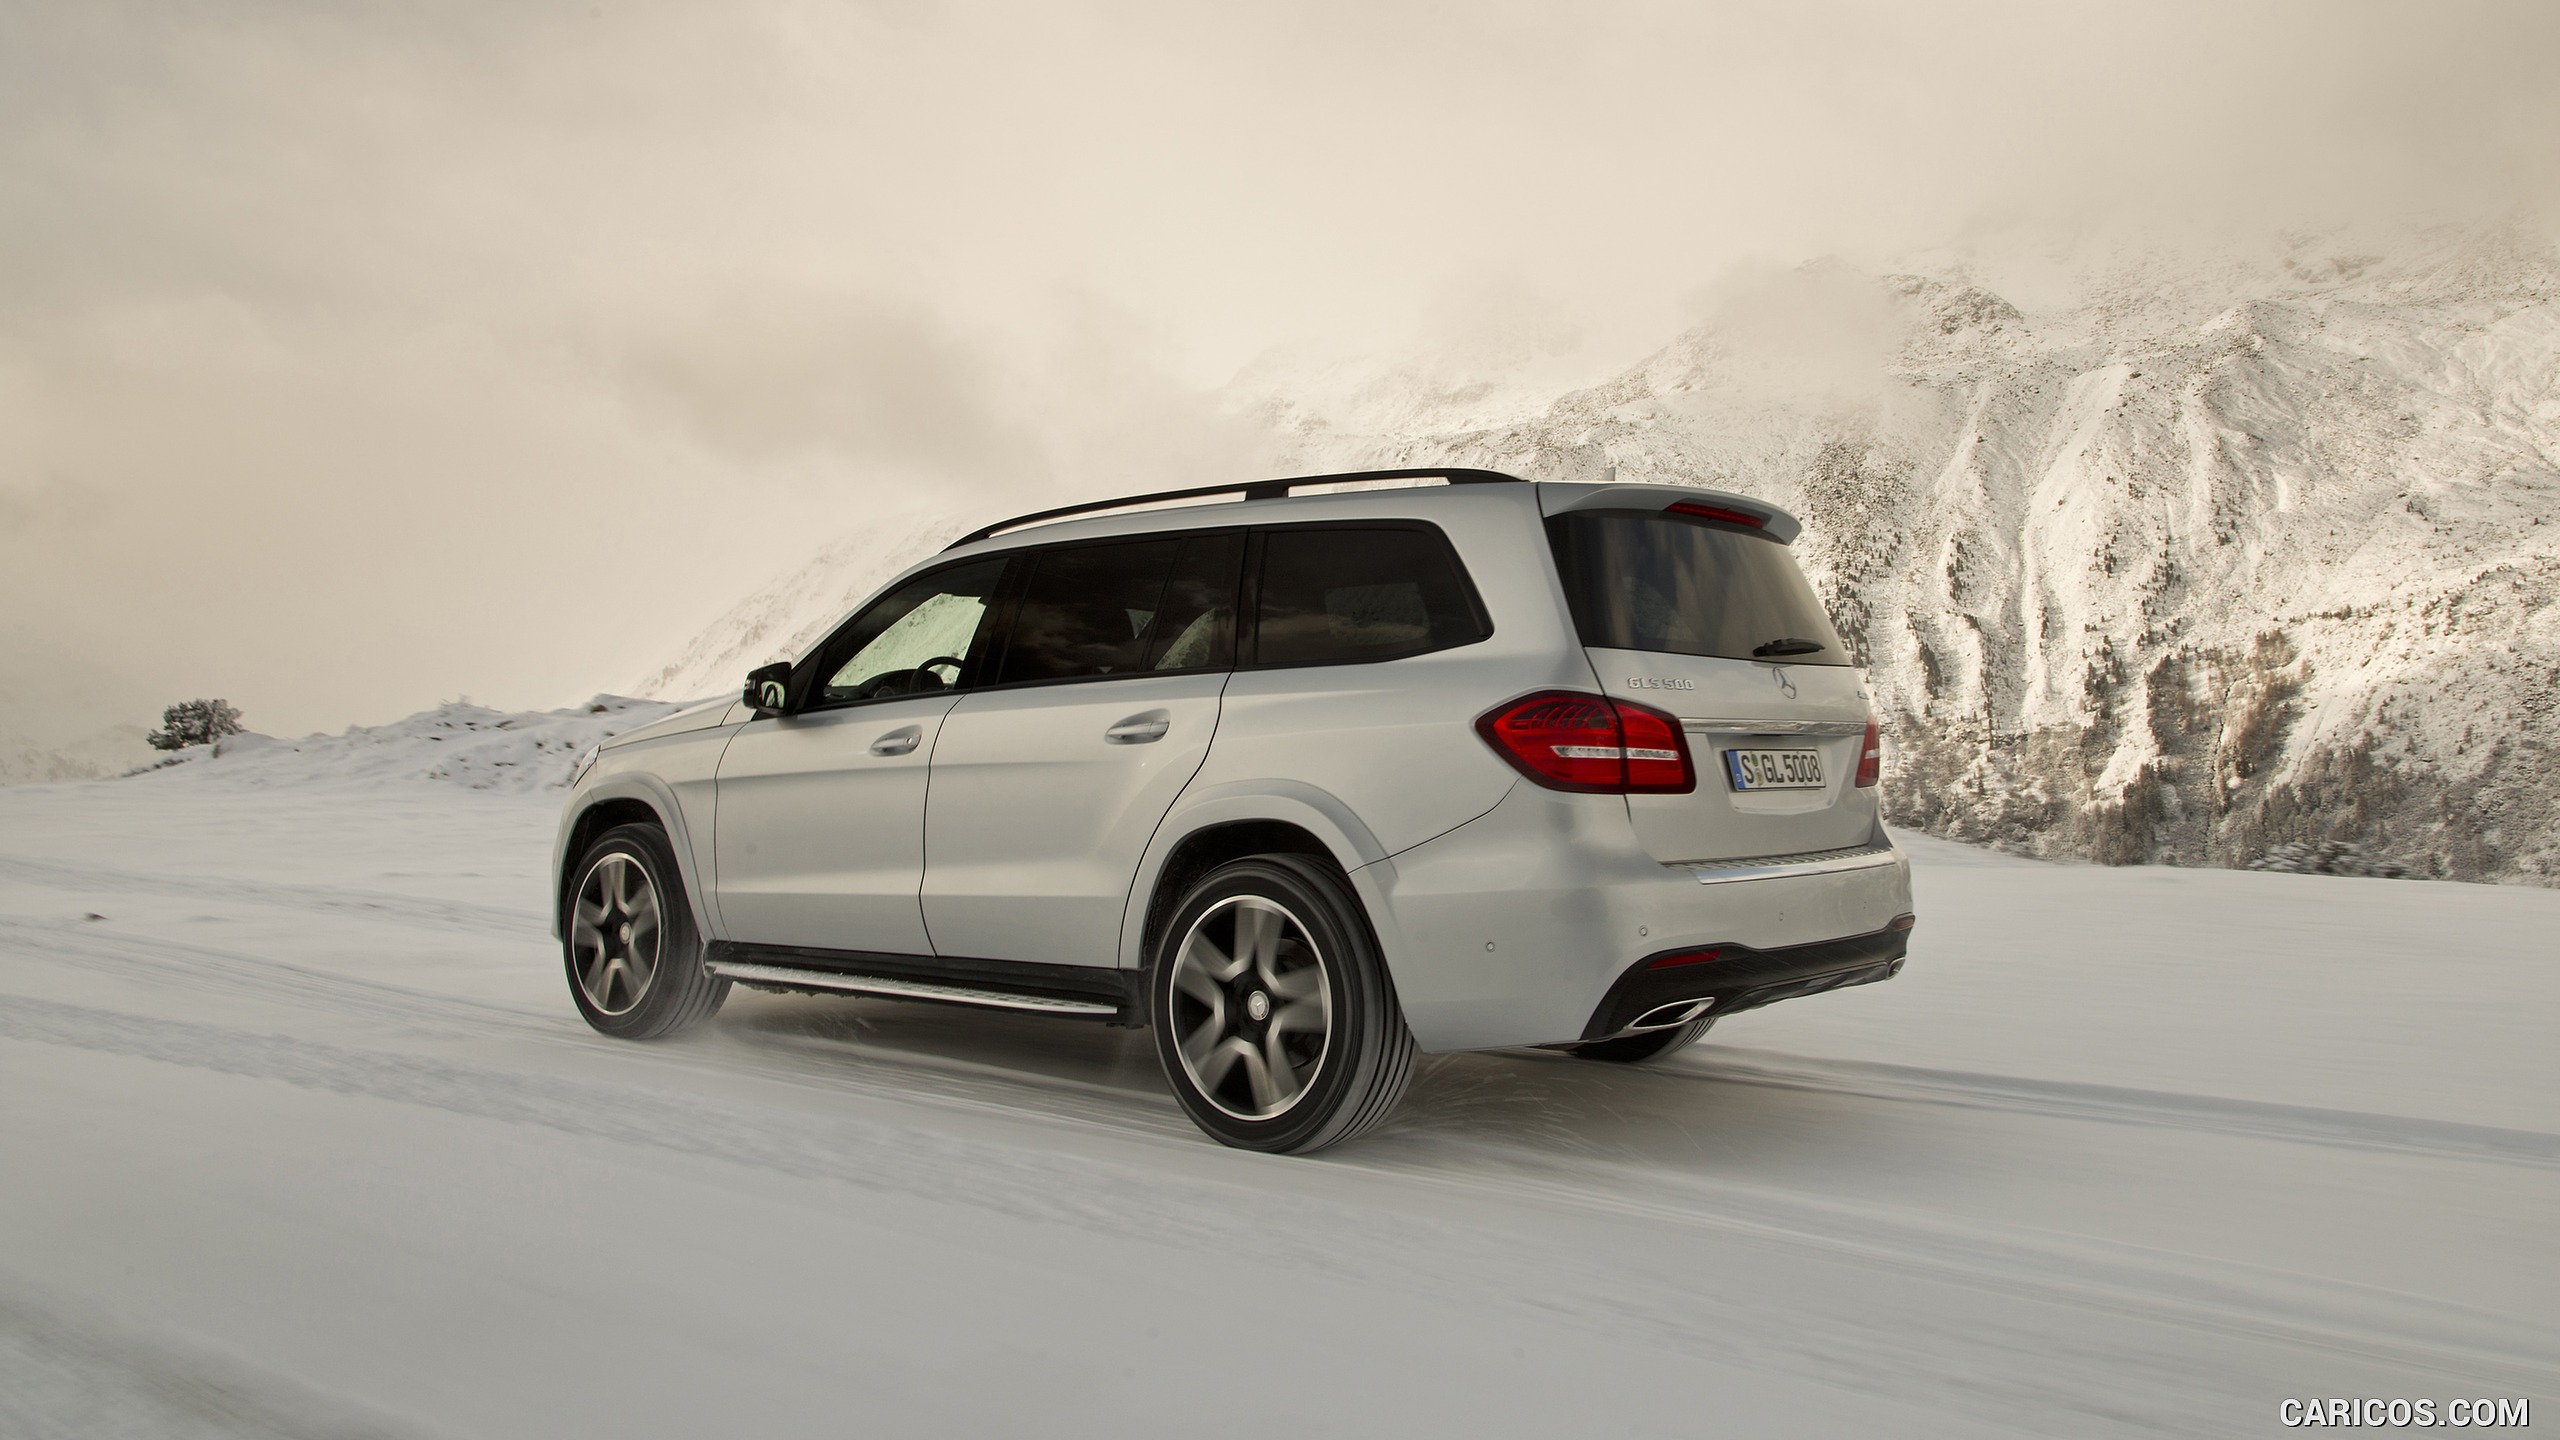 2017 Mercedes-Benz GLS 500 4MATIC AMG Line in Snow - Side, #132 of 255